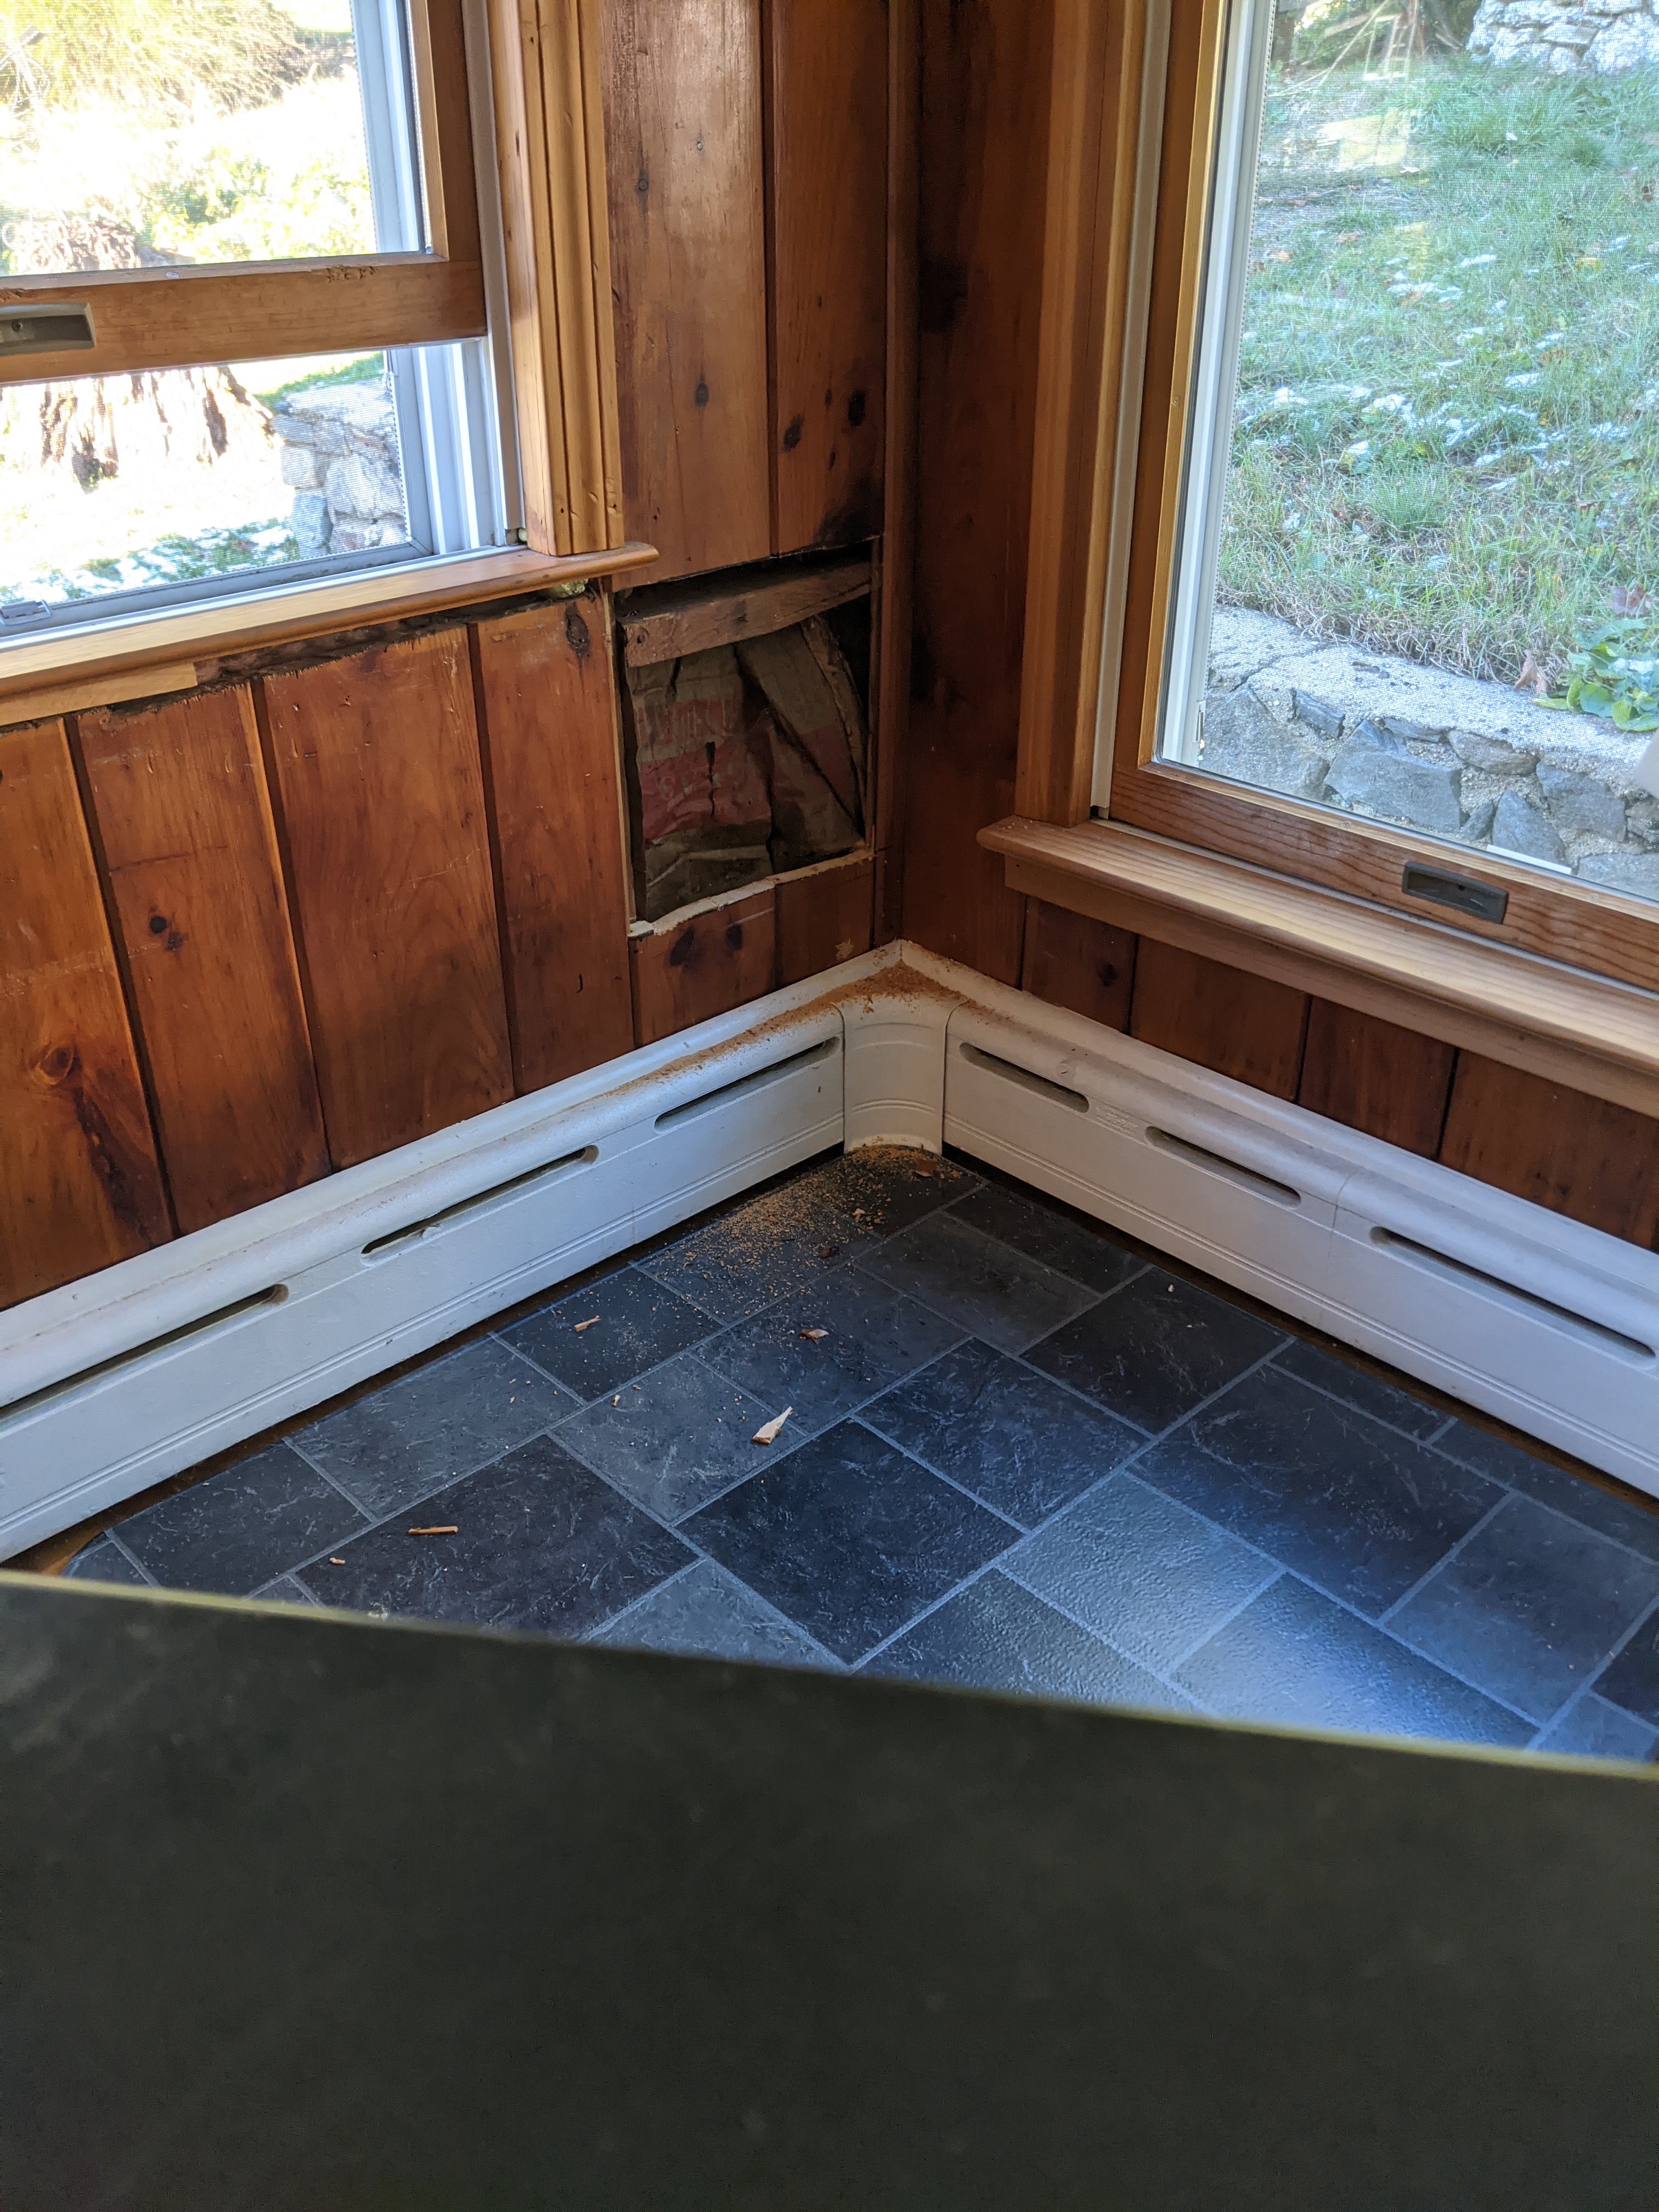 Pellet stove venting by window